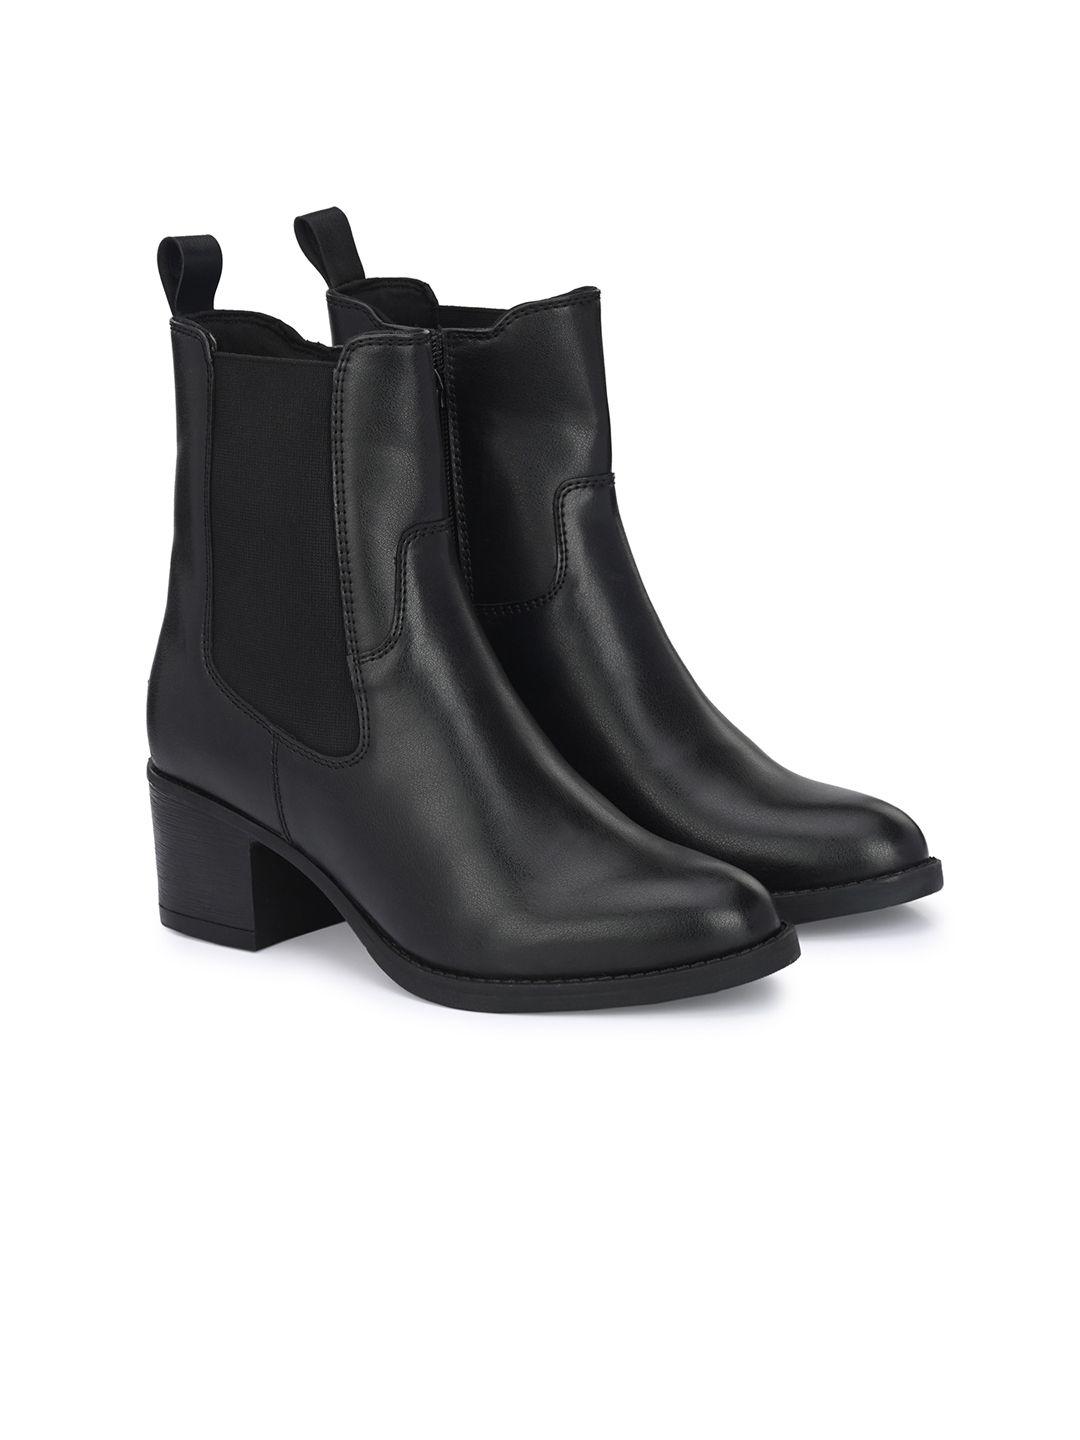 delize-women-heeled-leather-mid-top-regular-boots